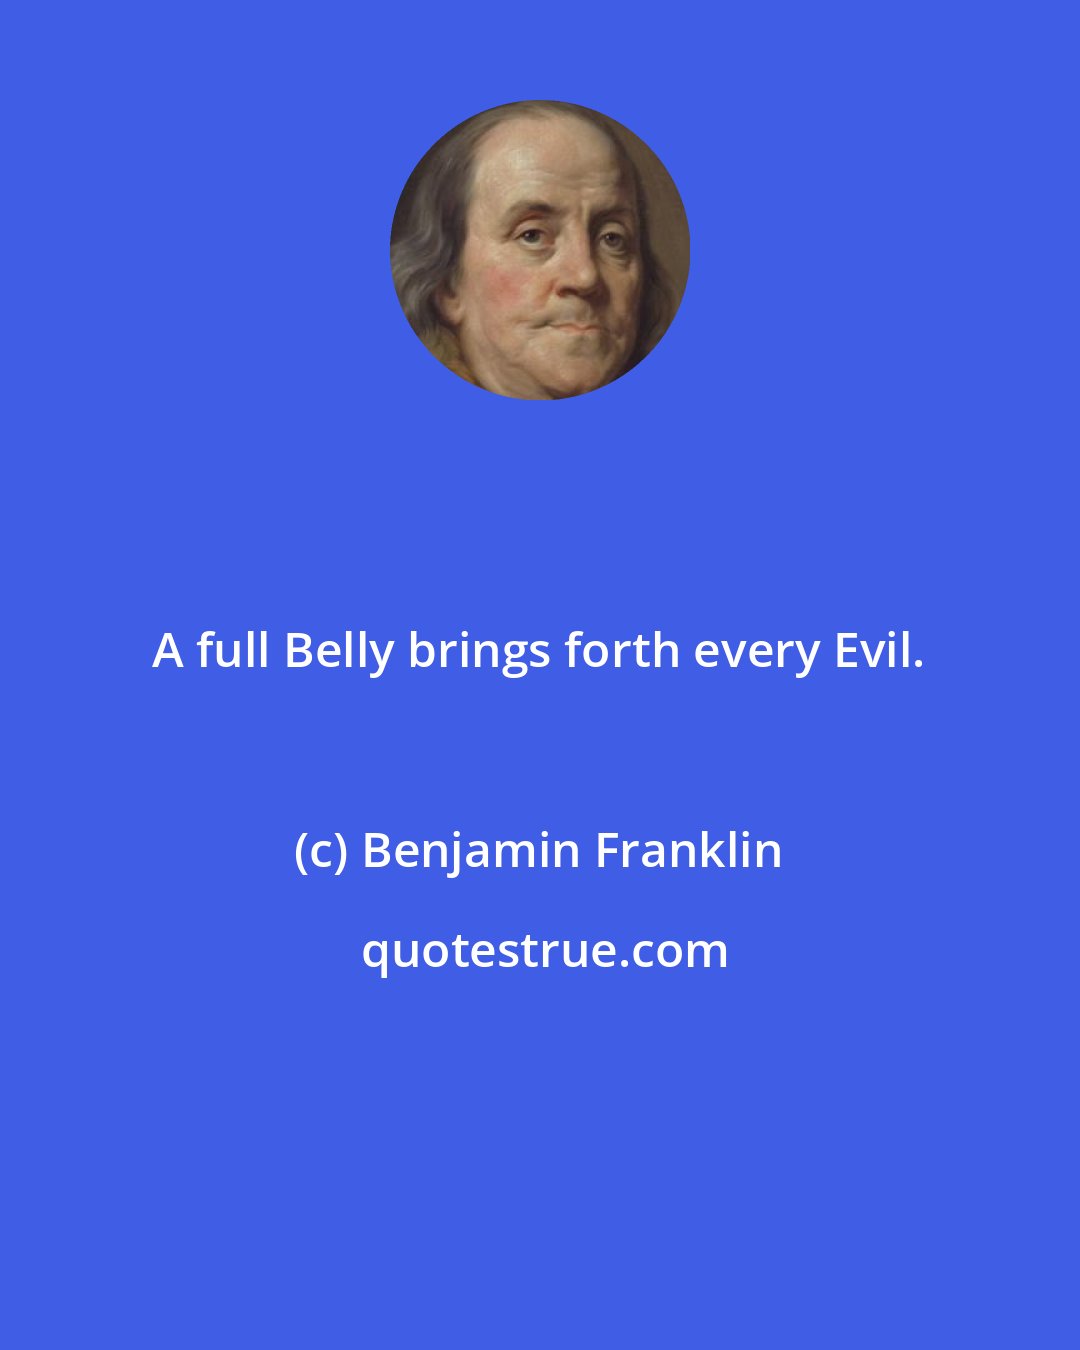 Benjamin Franklin: A full Belly brings forth every Evil.